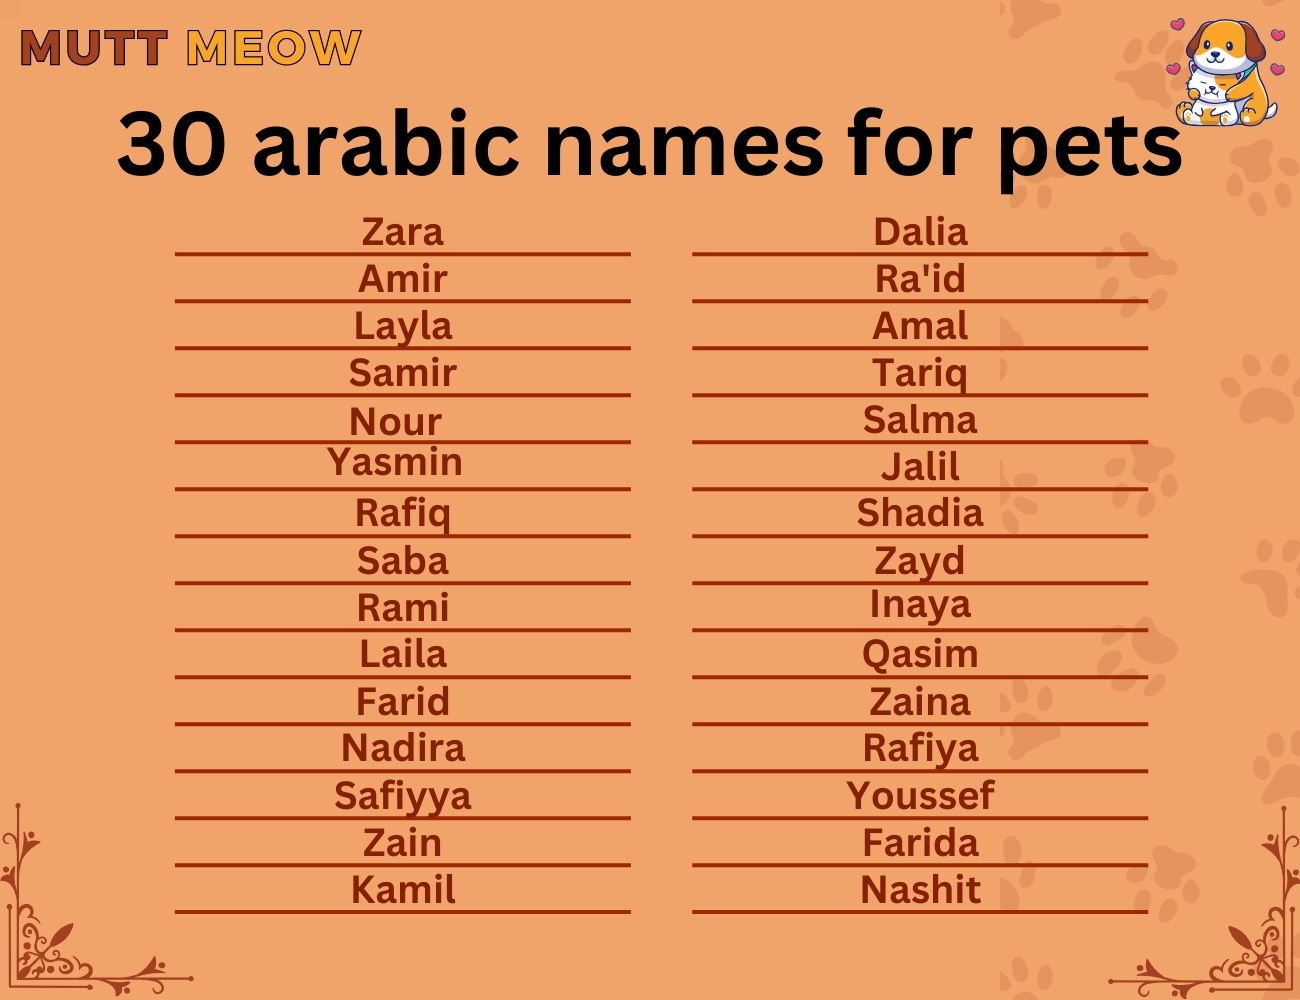 30 arabic names for pets